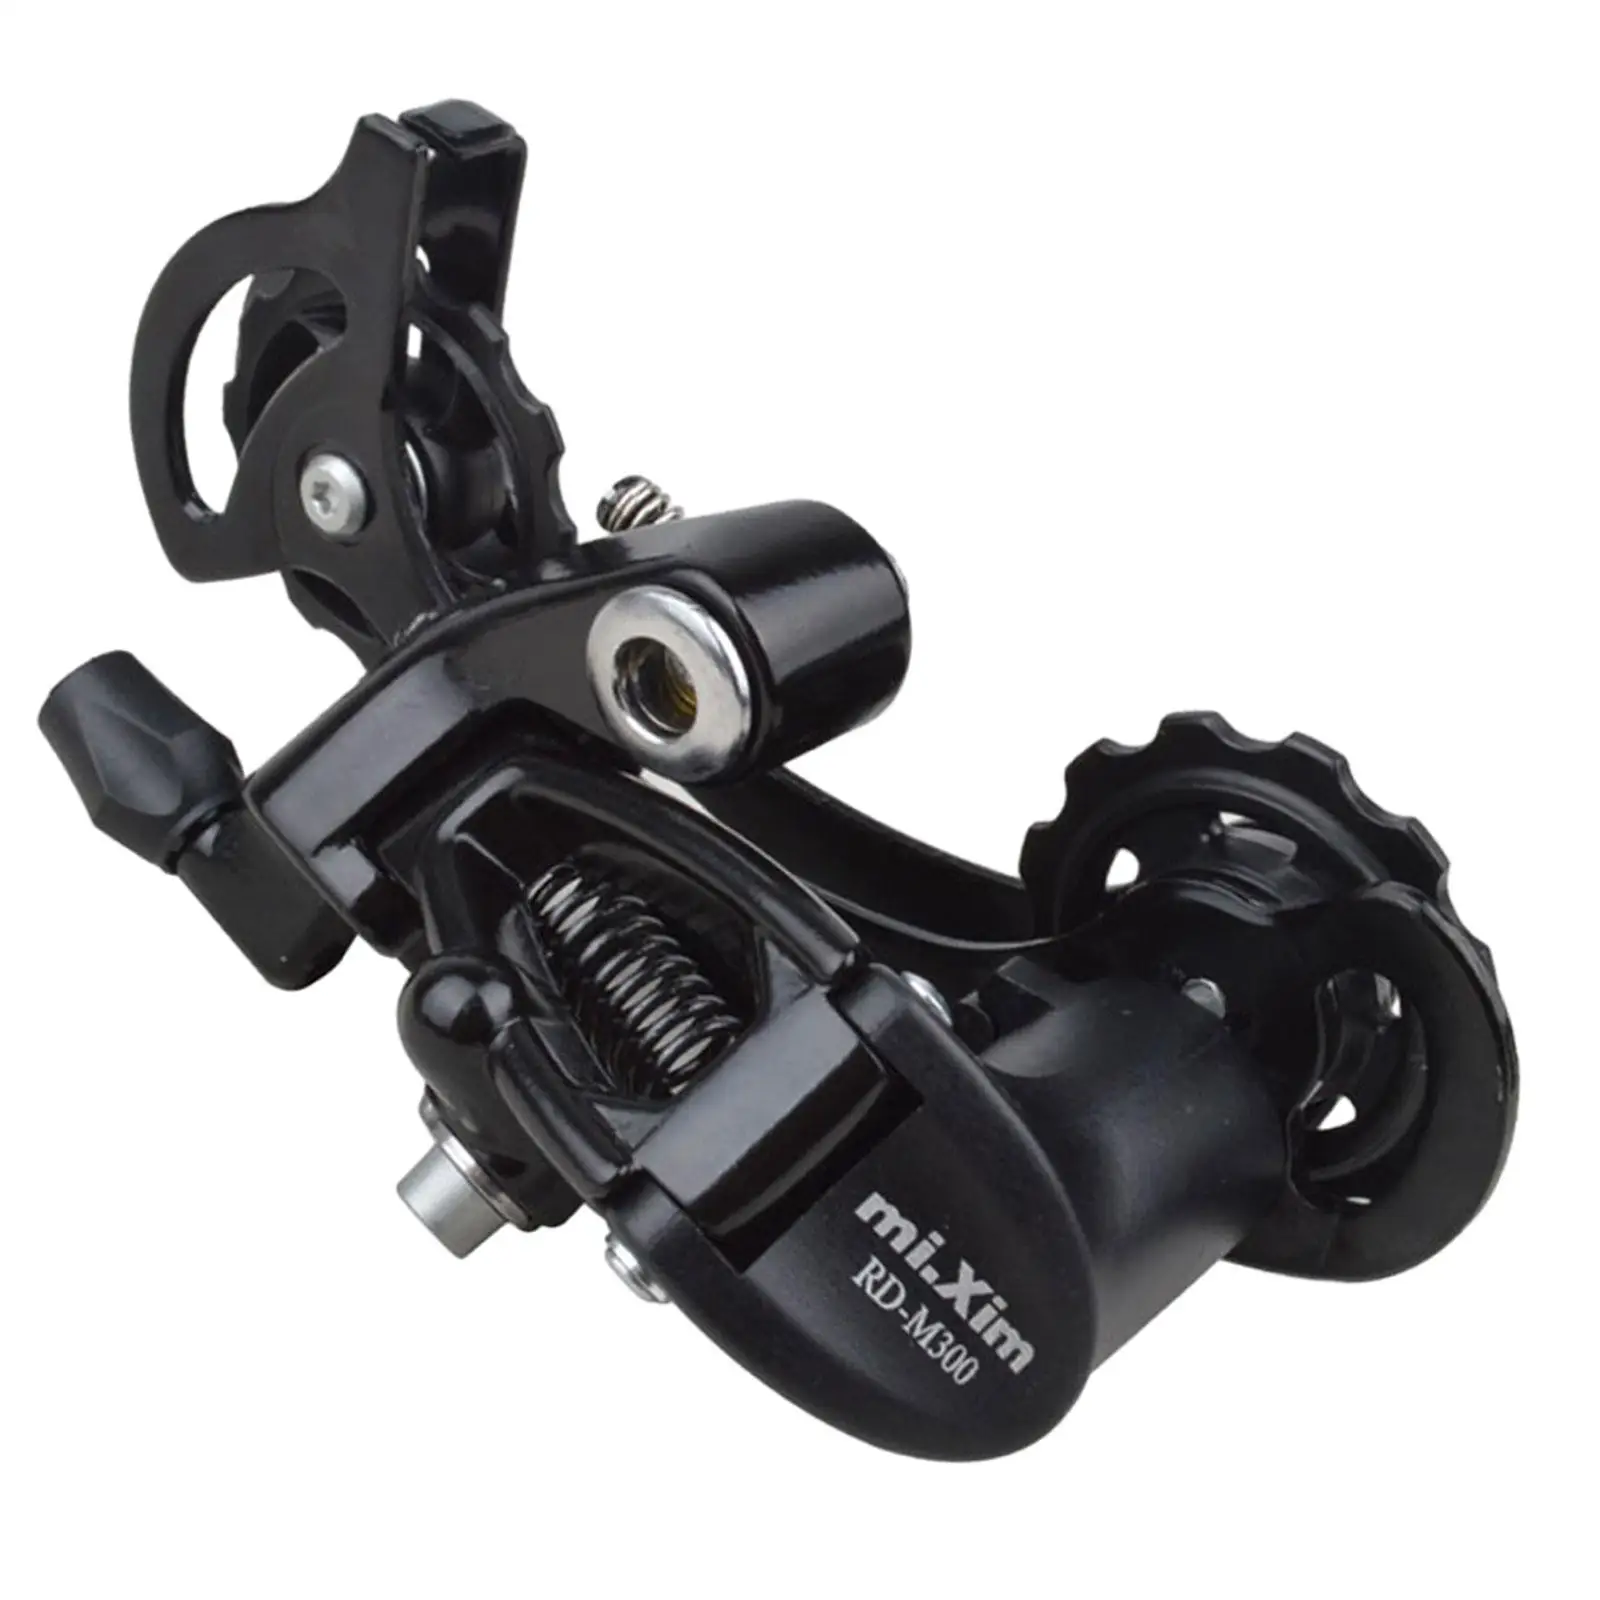 Rd Bicycle Rear Derailleur Outside Stable Simple to Install Sturdy Multiuse